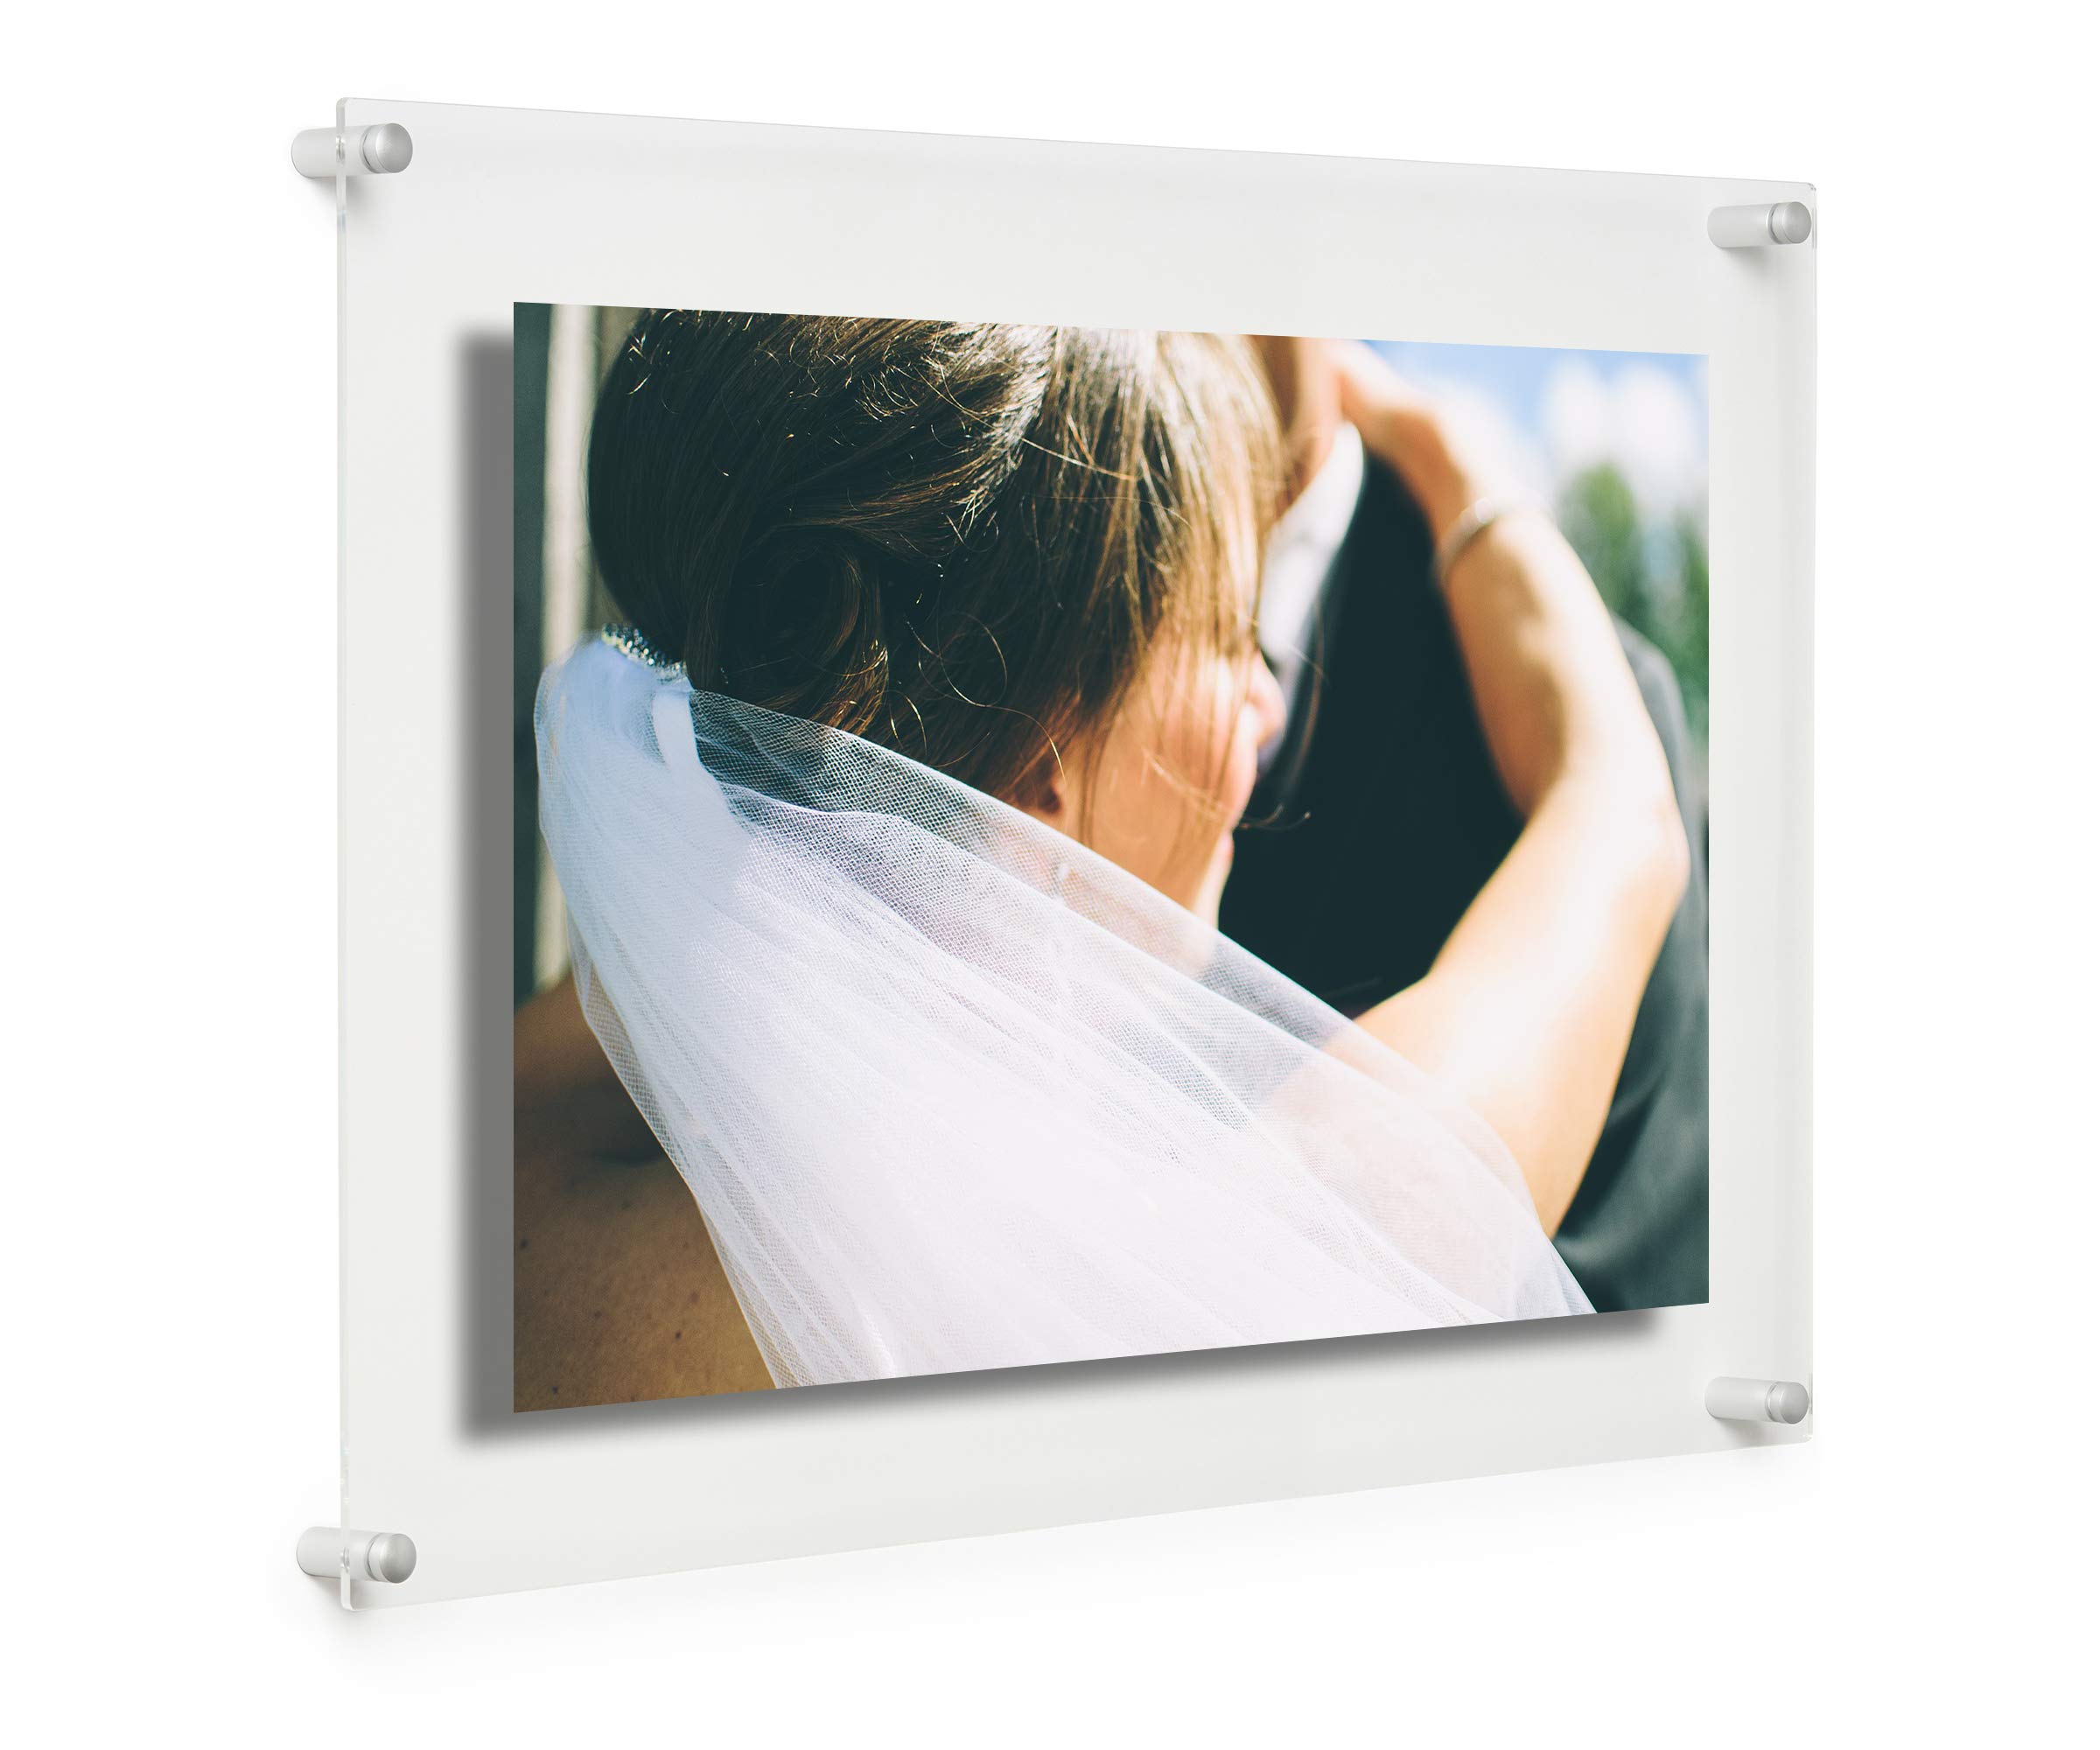 Cool Modern Frames Clear Floating Double Panel Acrylic Picture Frame, 11x17-Inch Art & Photos , Silver Hardware - GMS1521D